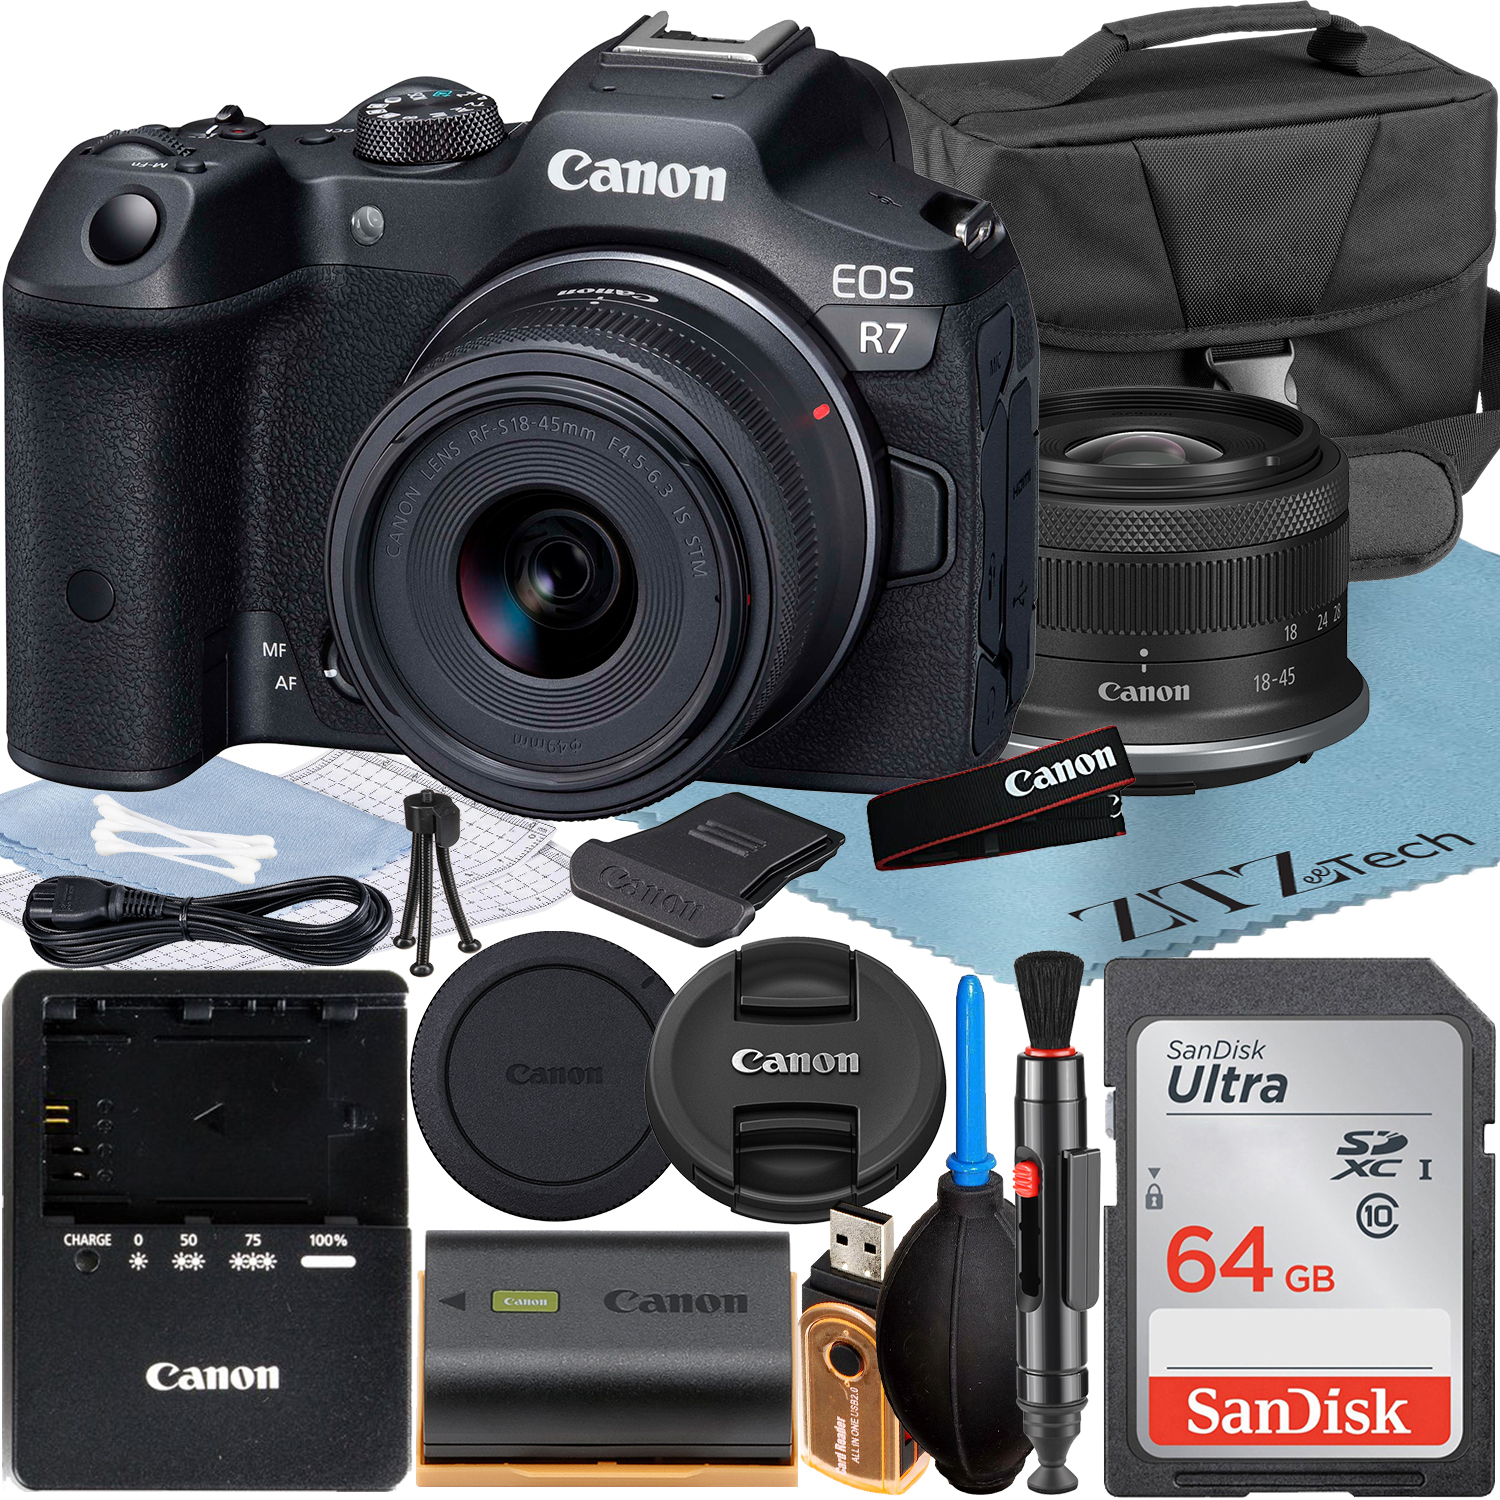 Canon EOS R7 Mirrorless Camera with RF-S 18-45mm Lens + SanDisk 64GB Memory Card + Case + ZeeTech Accessory Bundle